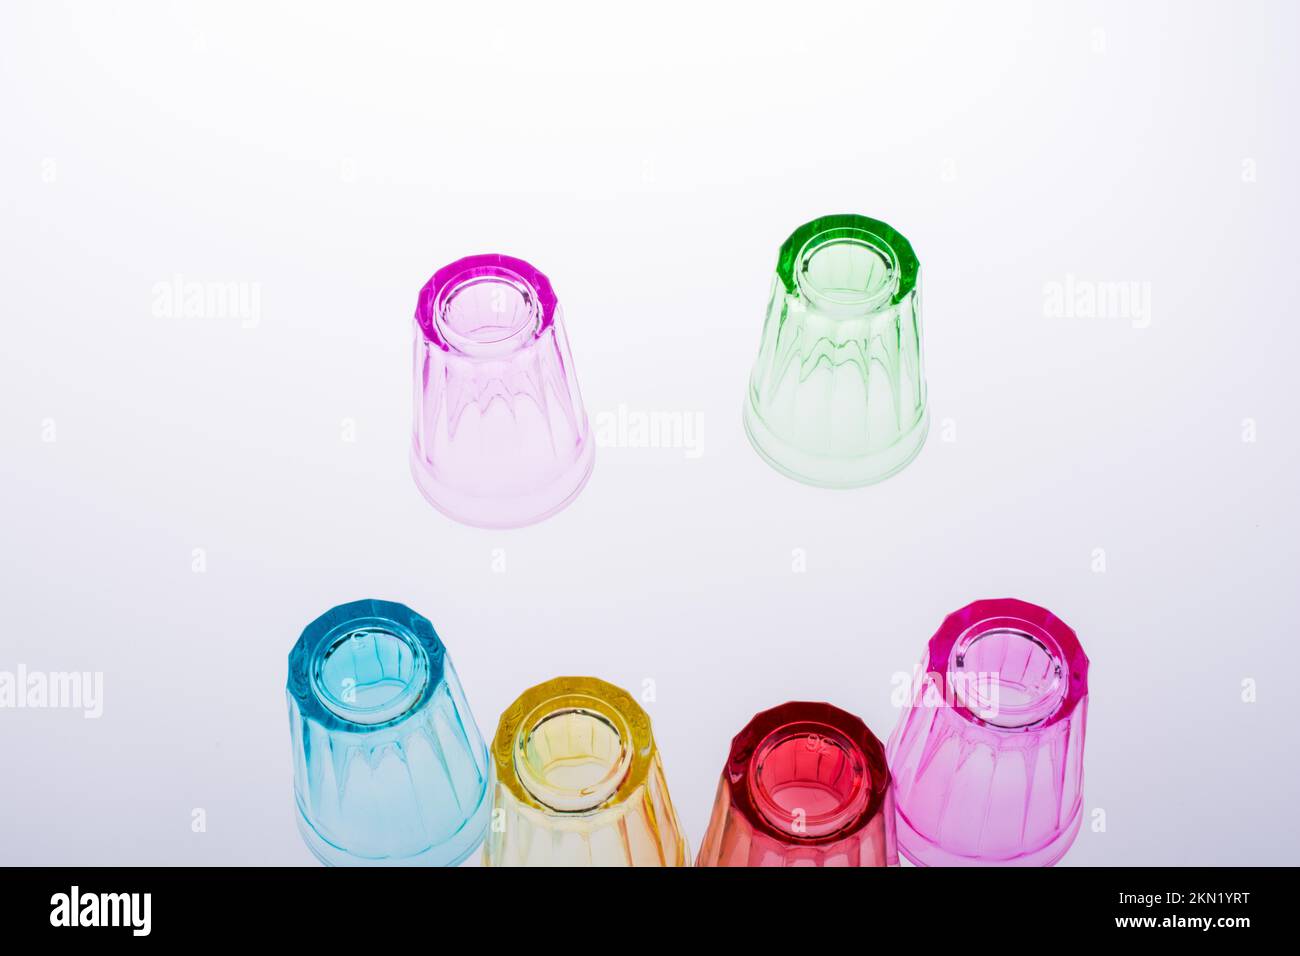 Colorful drinking glasses on white background Stock Photo